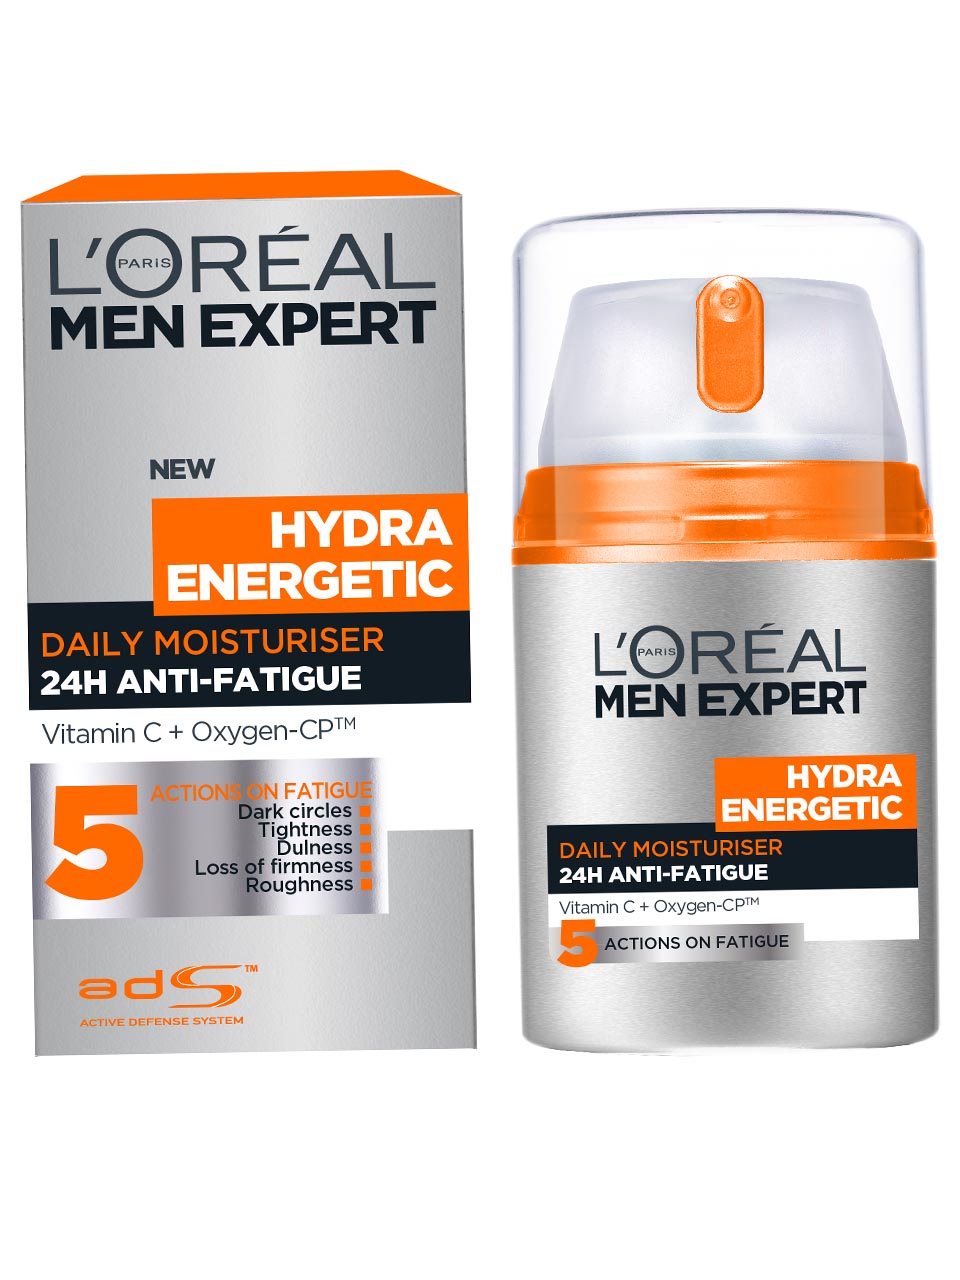 L'Oreal Men Expert Hydra Energetic Daily Anti-Fatigue Moisturizing Lotion null - onesize - 1